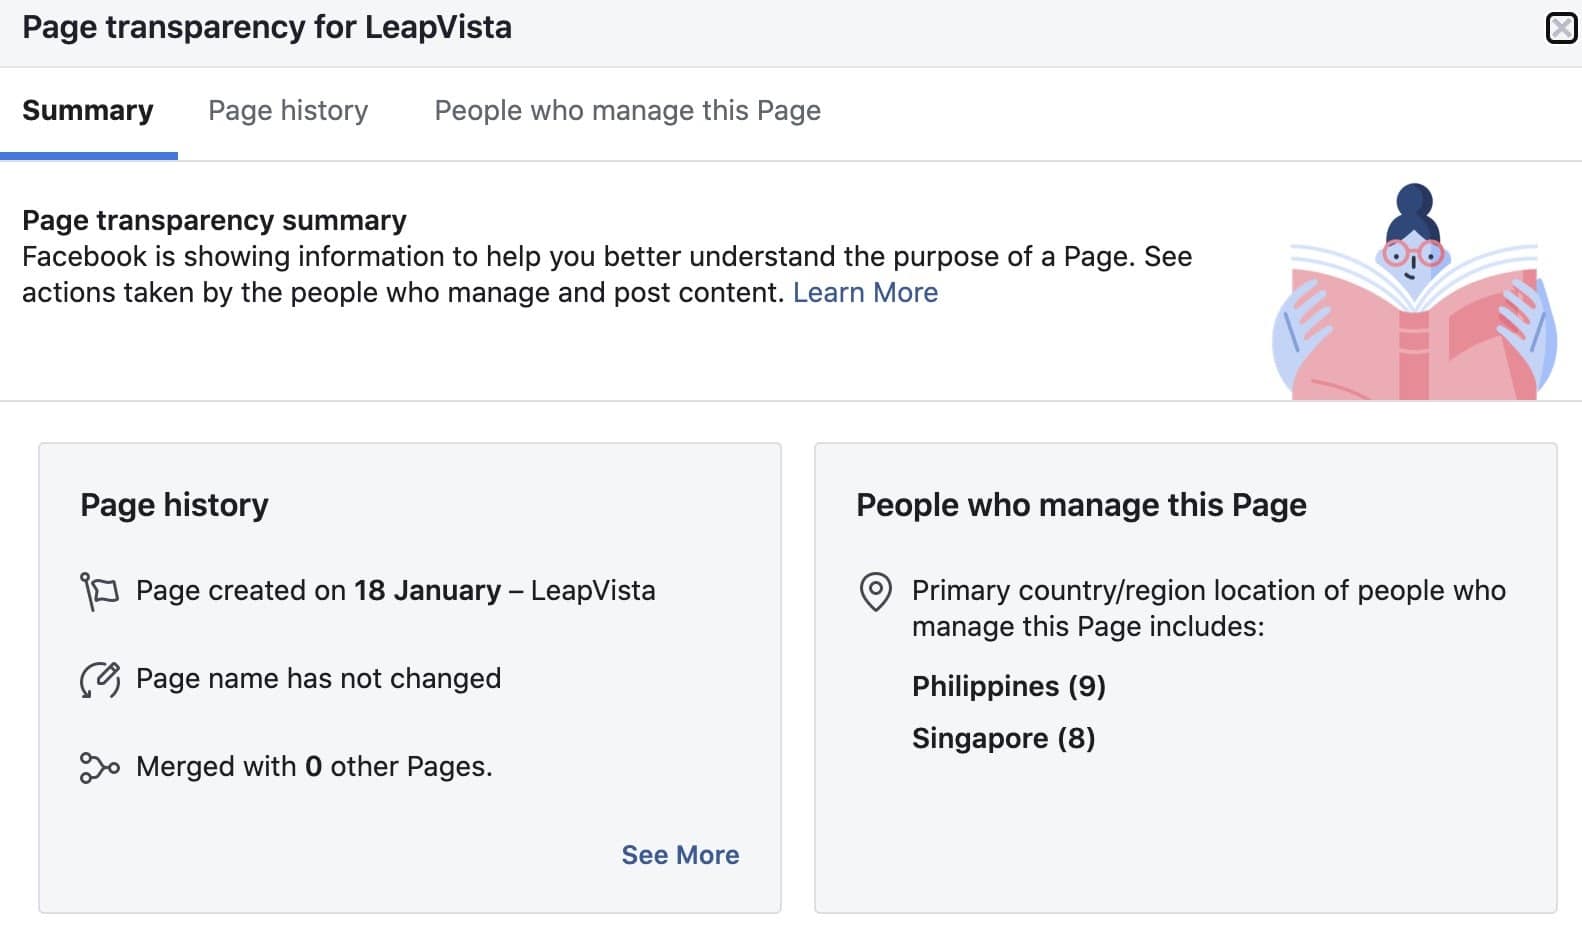 LeapVista page transparency